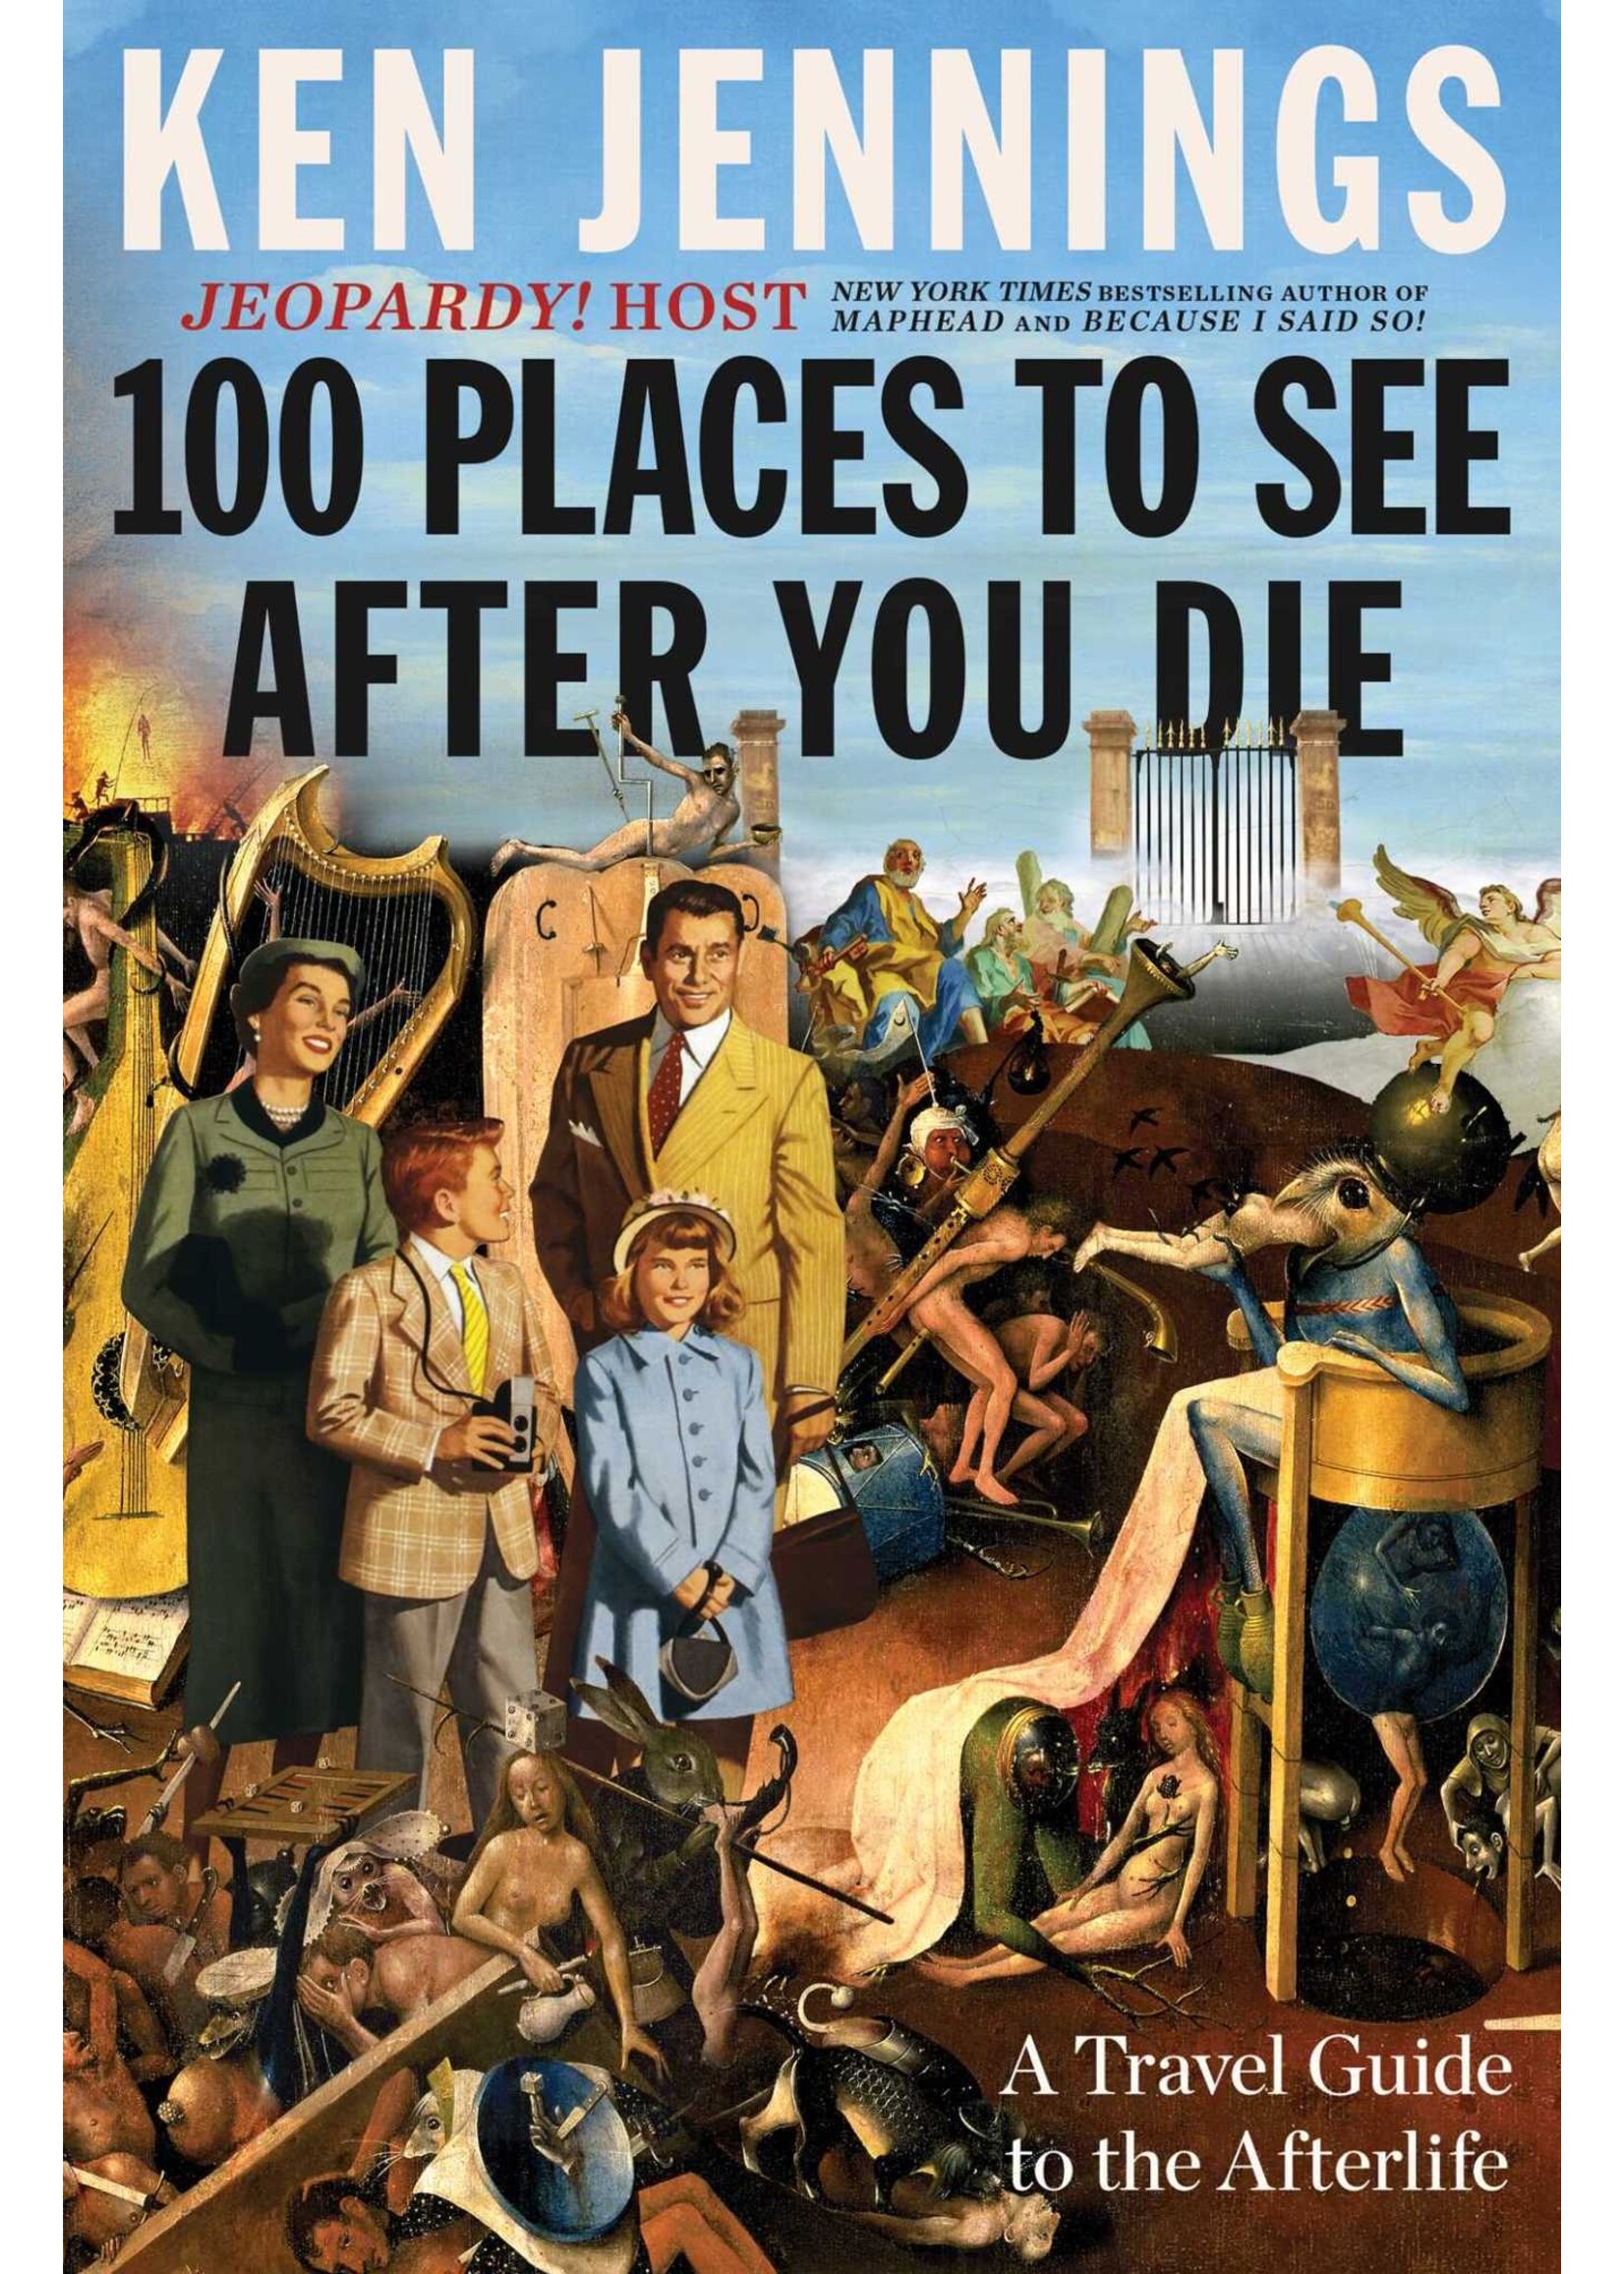 100 Places to See After You Die: A Travel Guide to the Afterlife by Ken Jennings